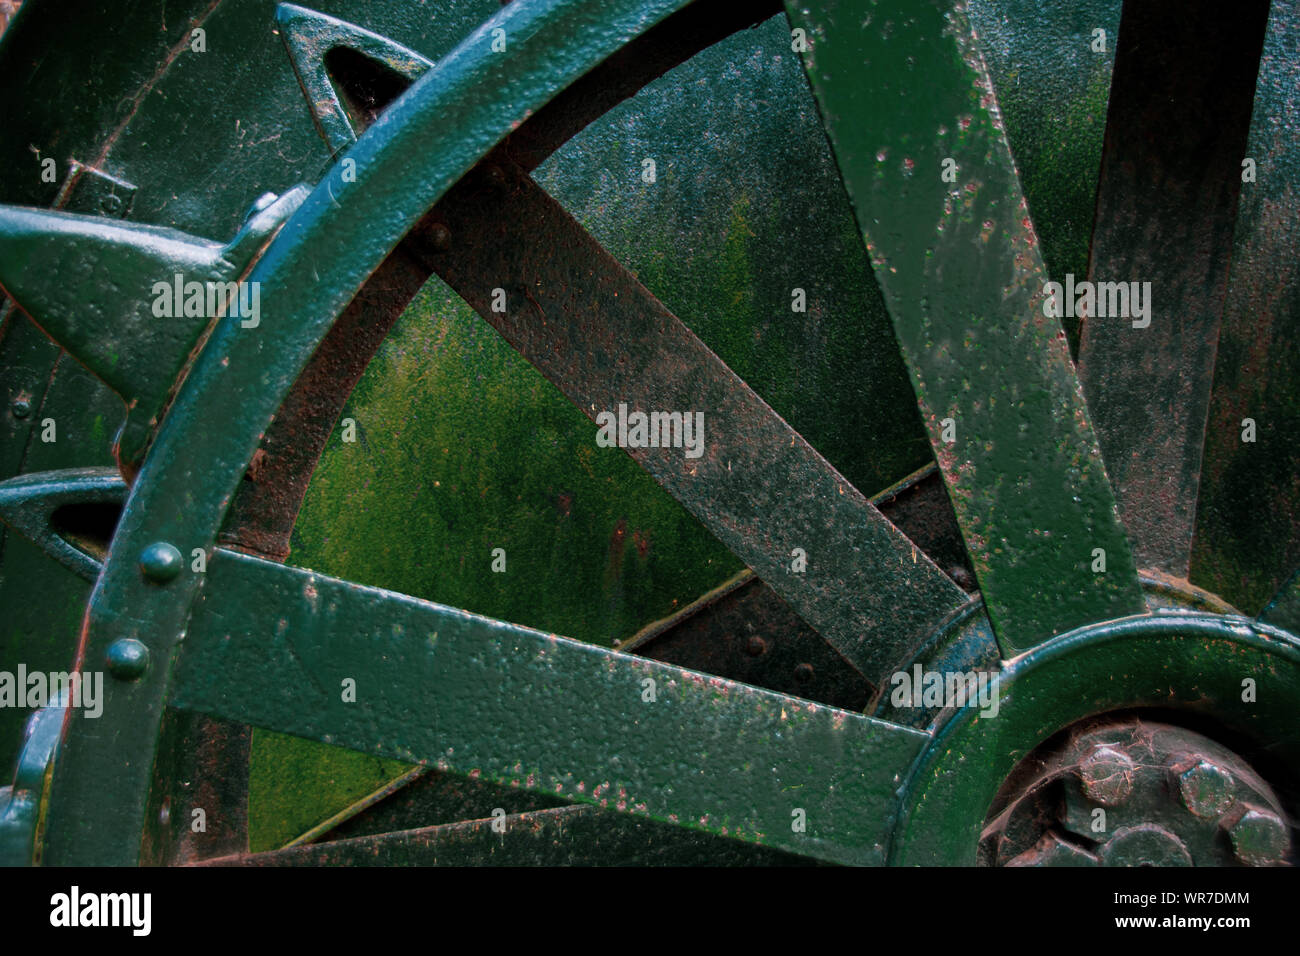 Close up of an old green tractor wheel Stock Photo